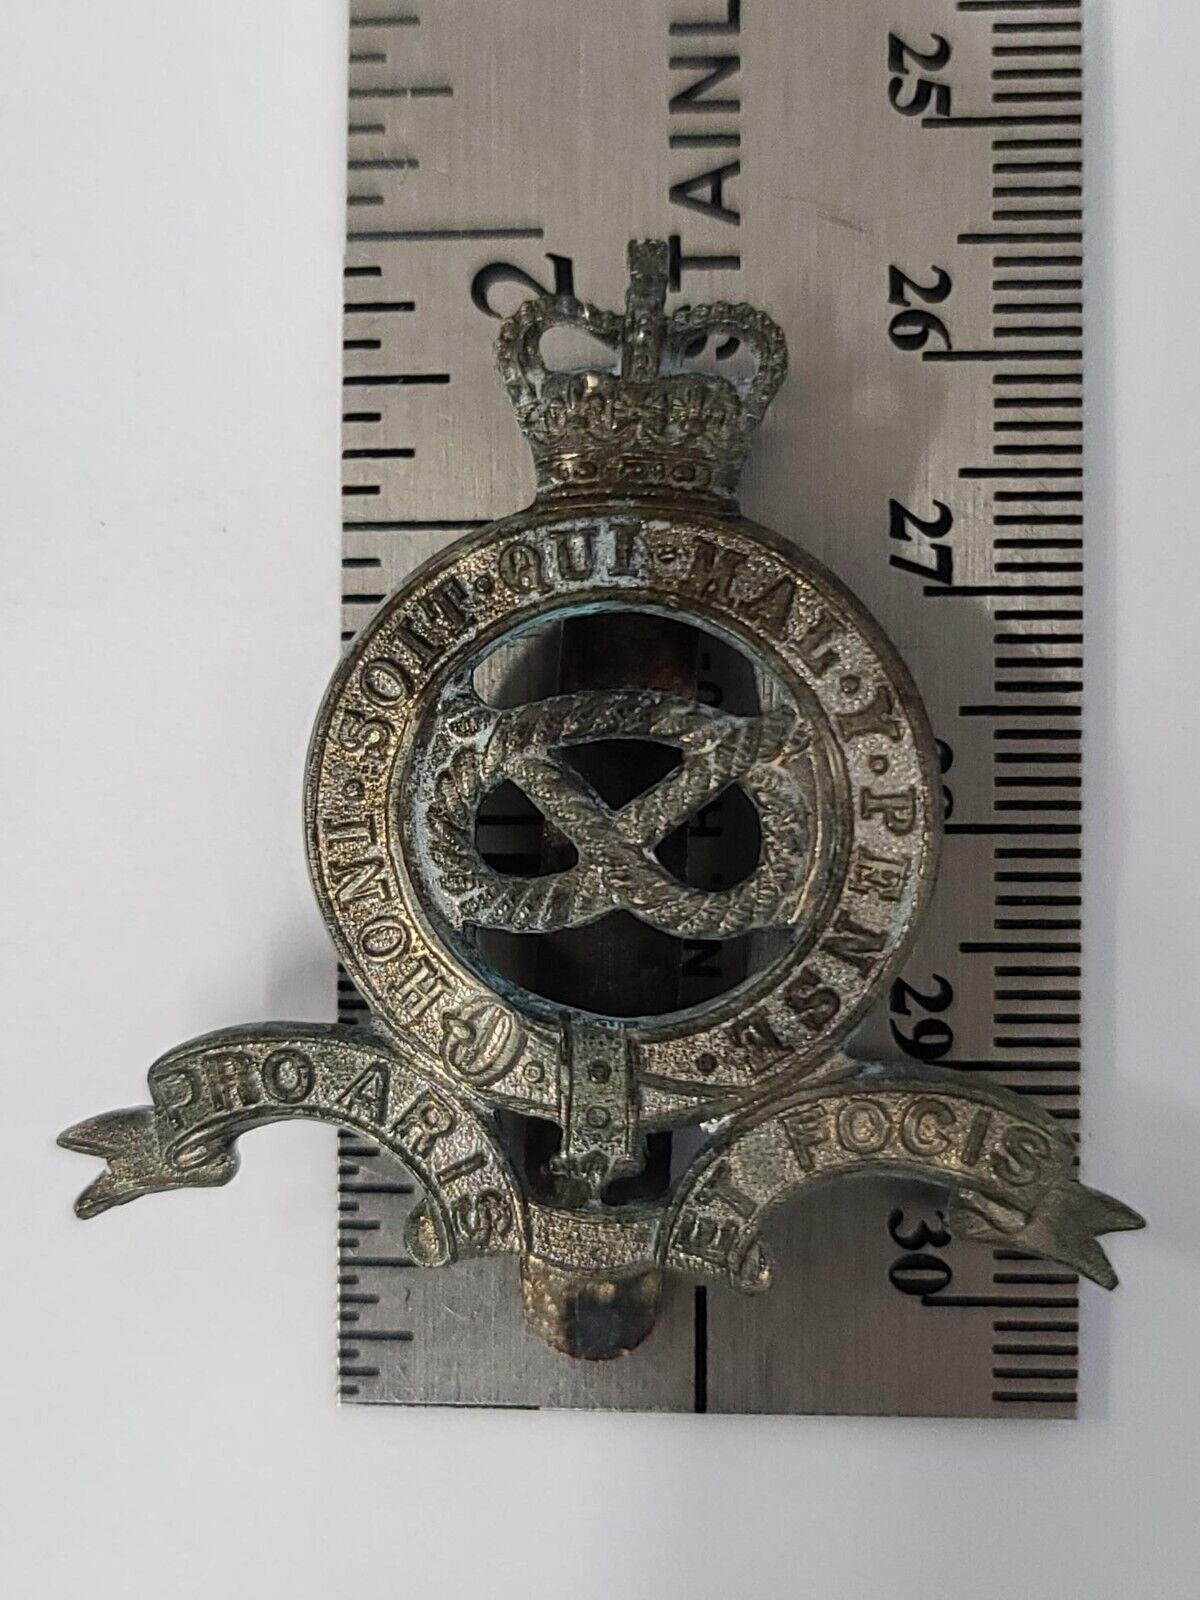 The Staffordshire Yeomanry Queen's Own Royal Regt Cap Badge